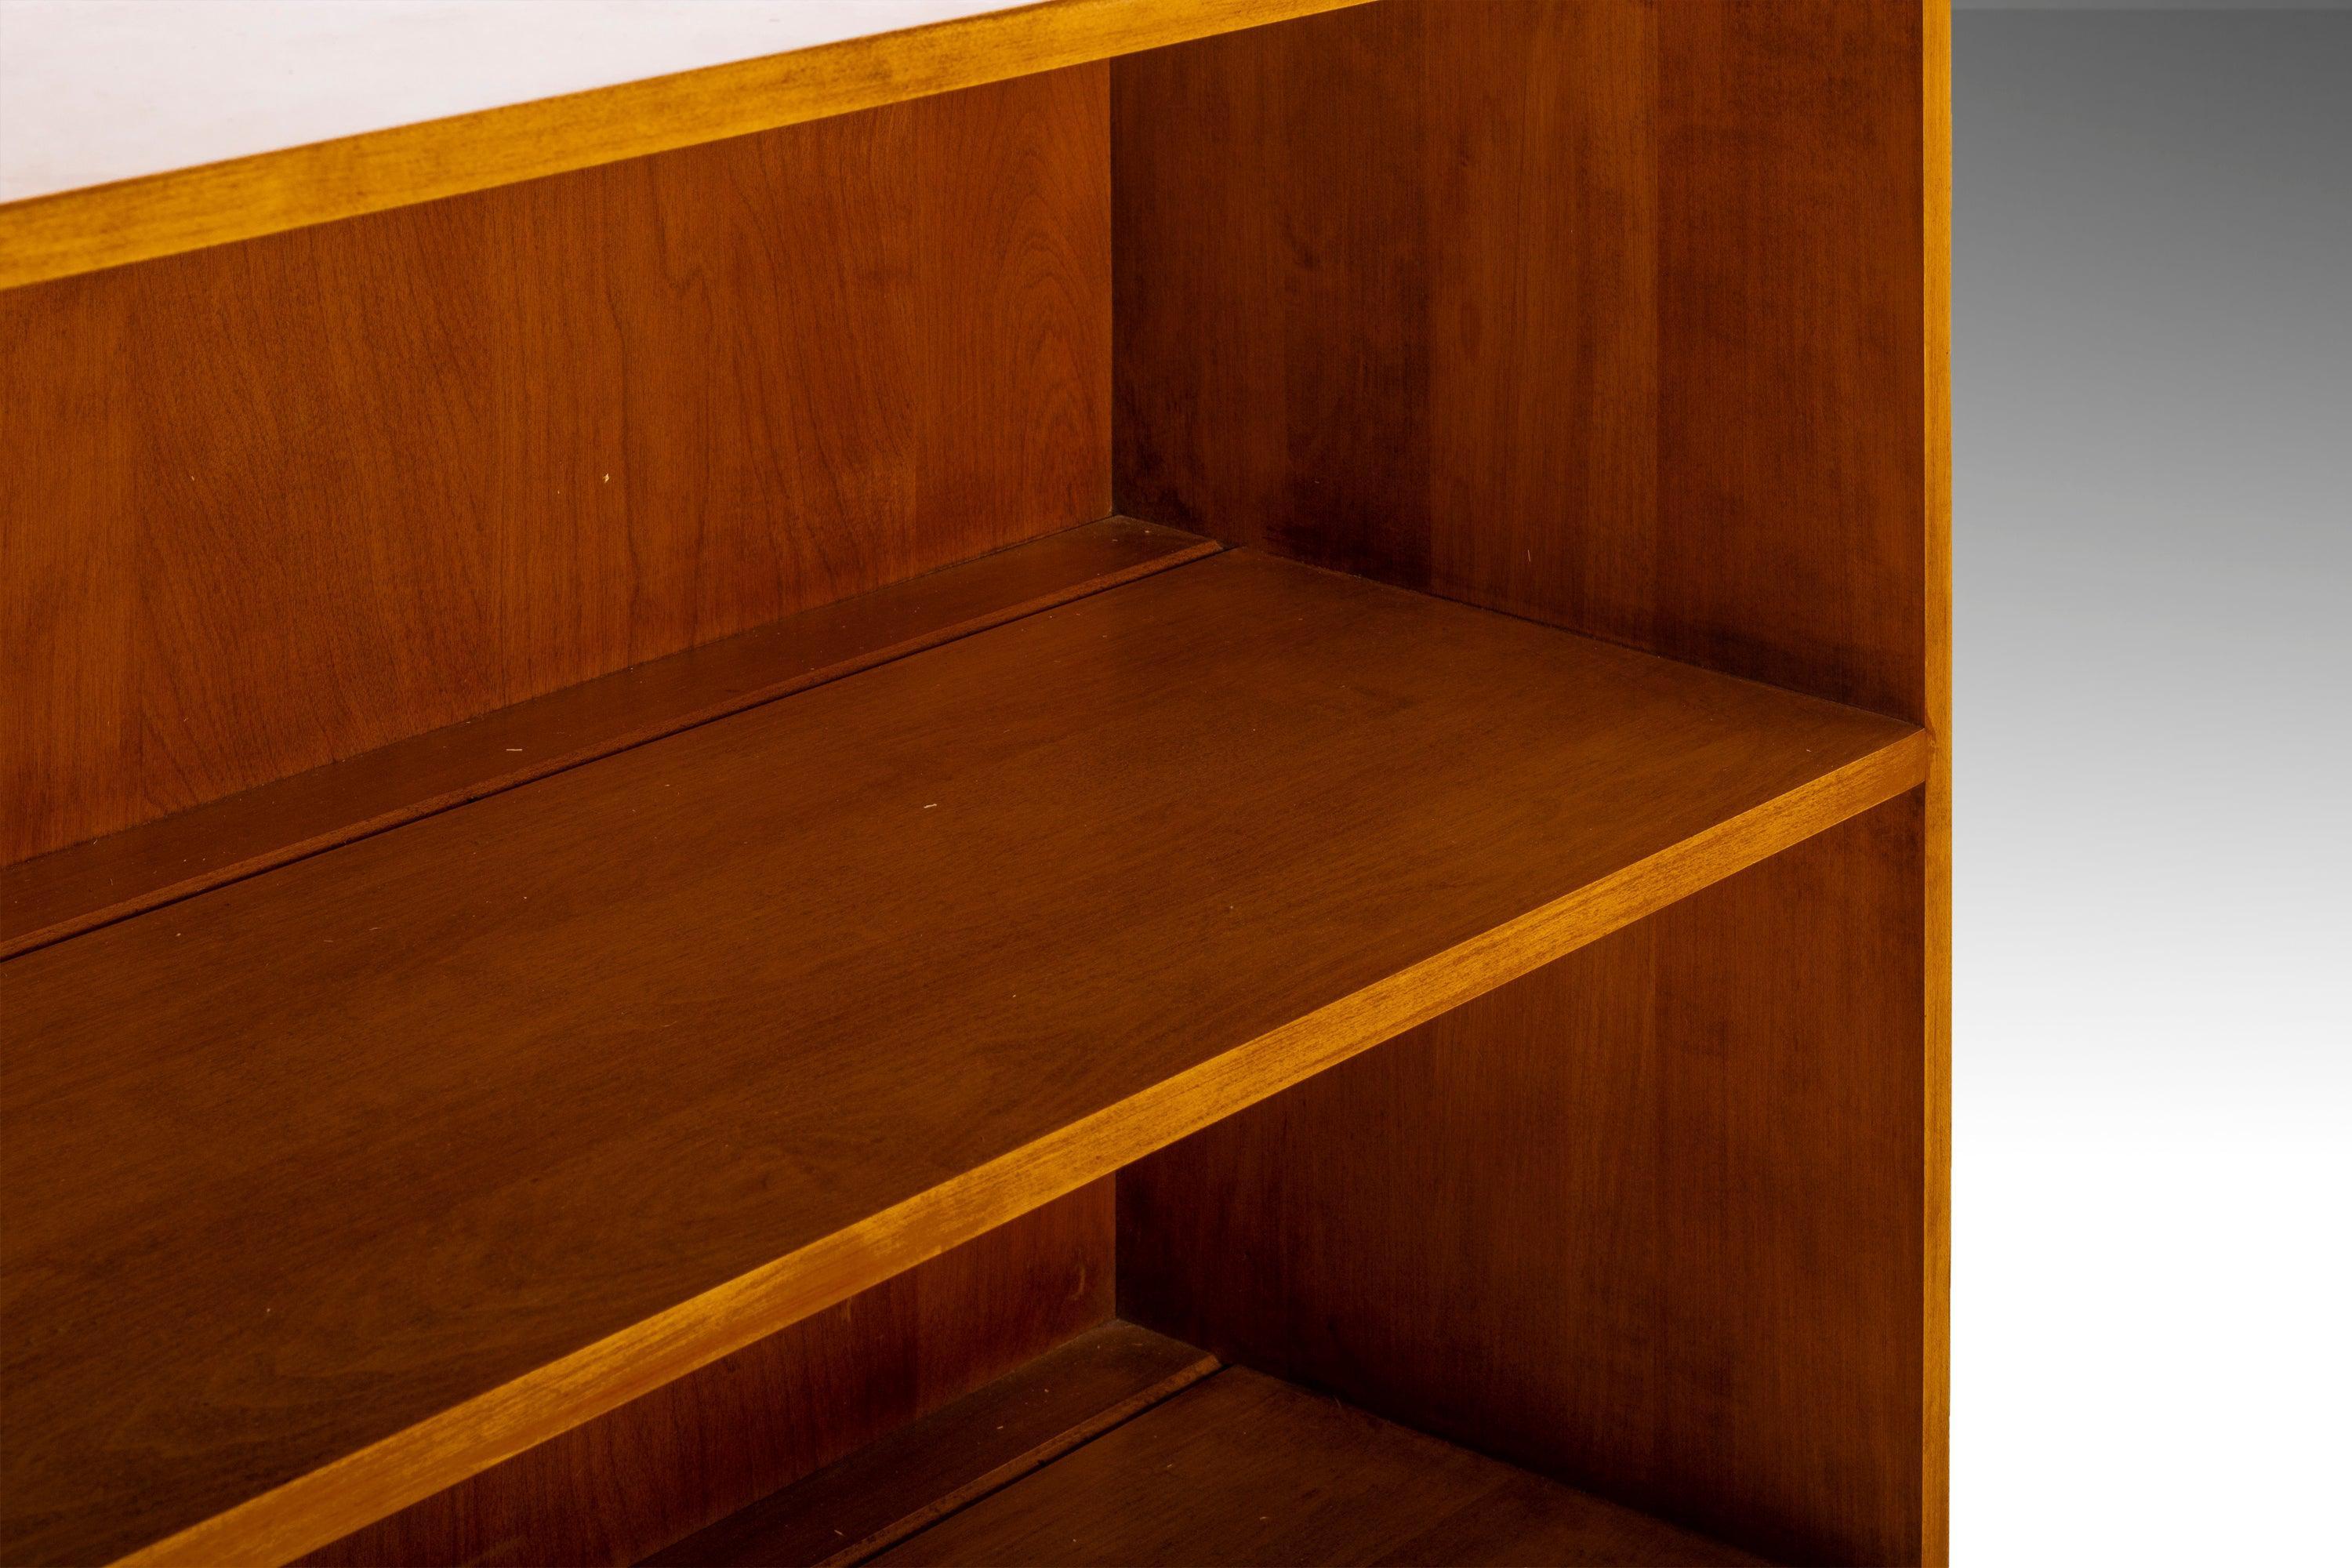 Mid-20th Century Bookcase / Entry Table by Paul McCobb for Winchendon Planner Group, USA, c. 1960 For Sale